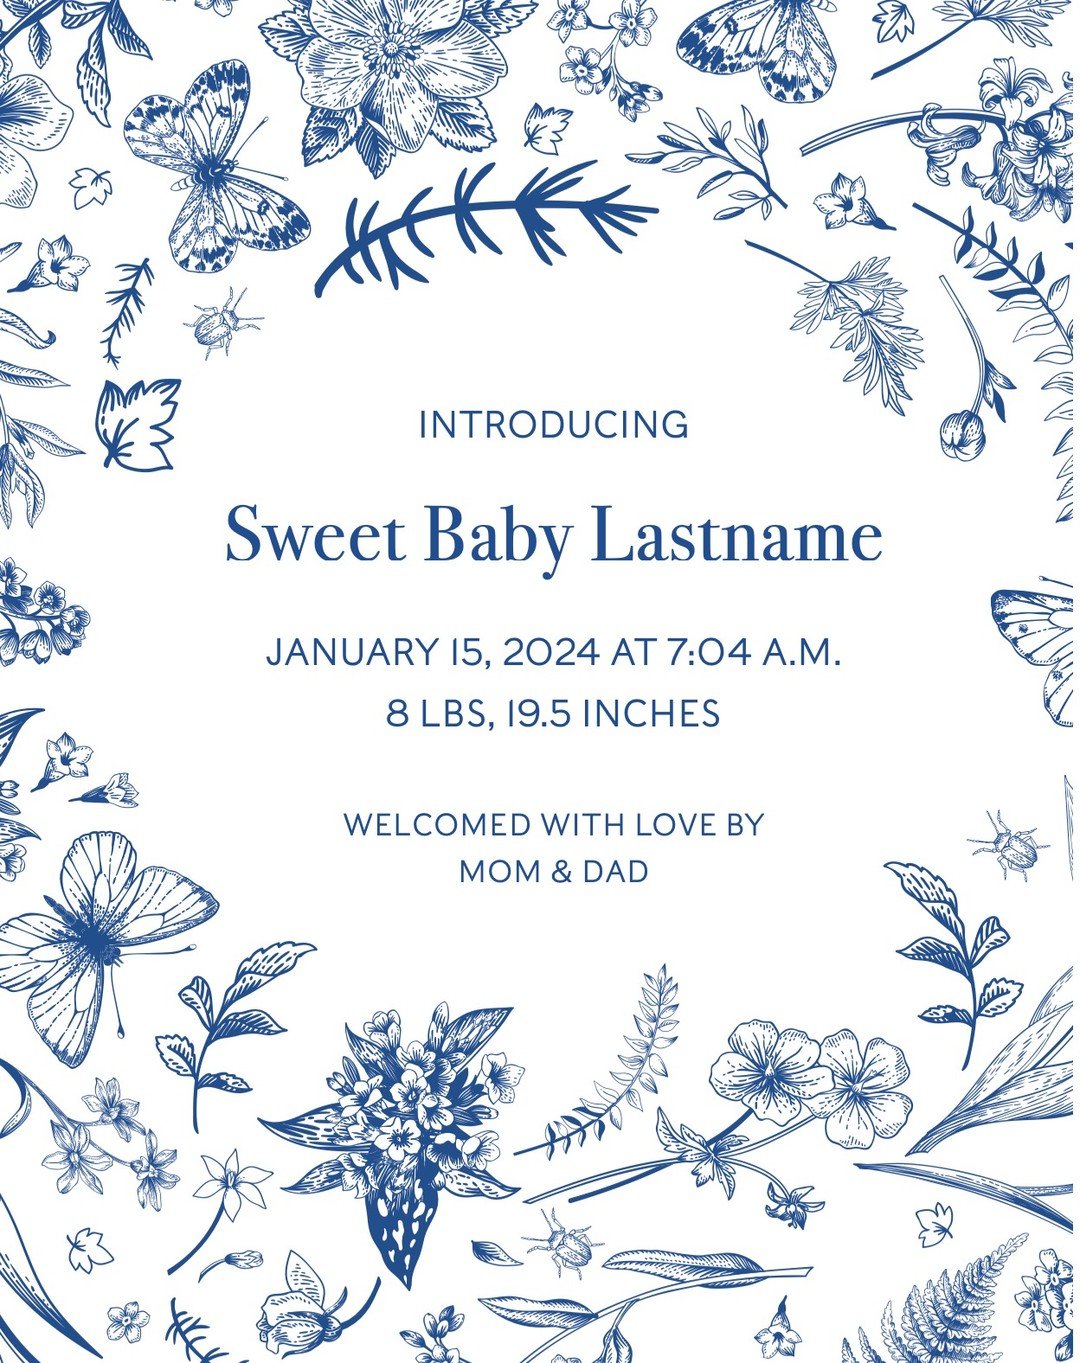 Special baby #announcement for the sweetest little man! Absolutely loved working on this one with you, @rblebowitz